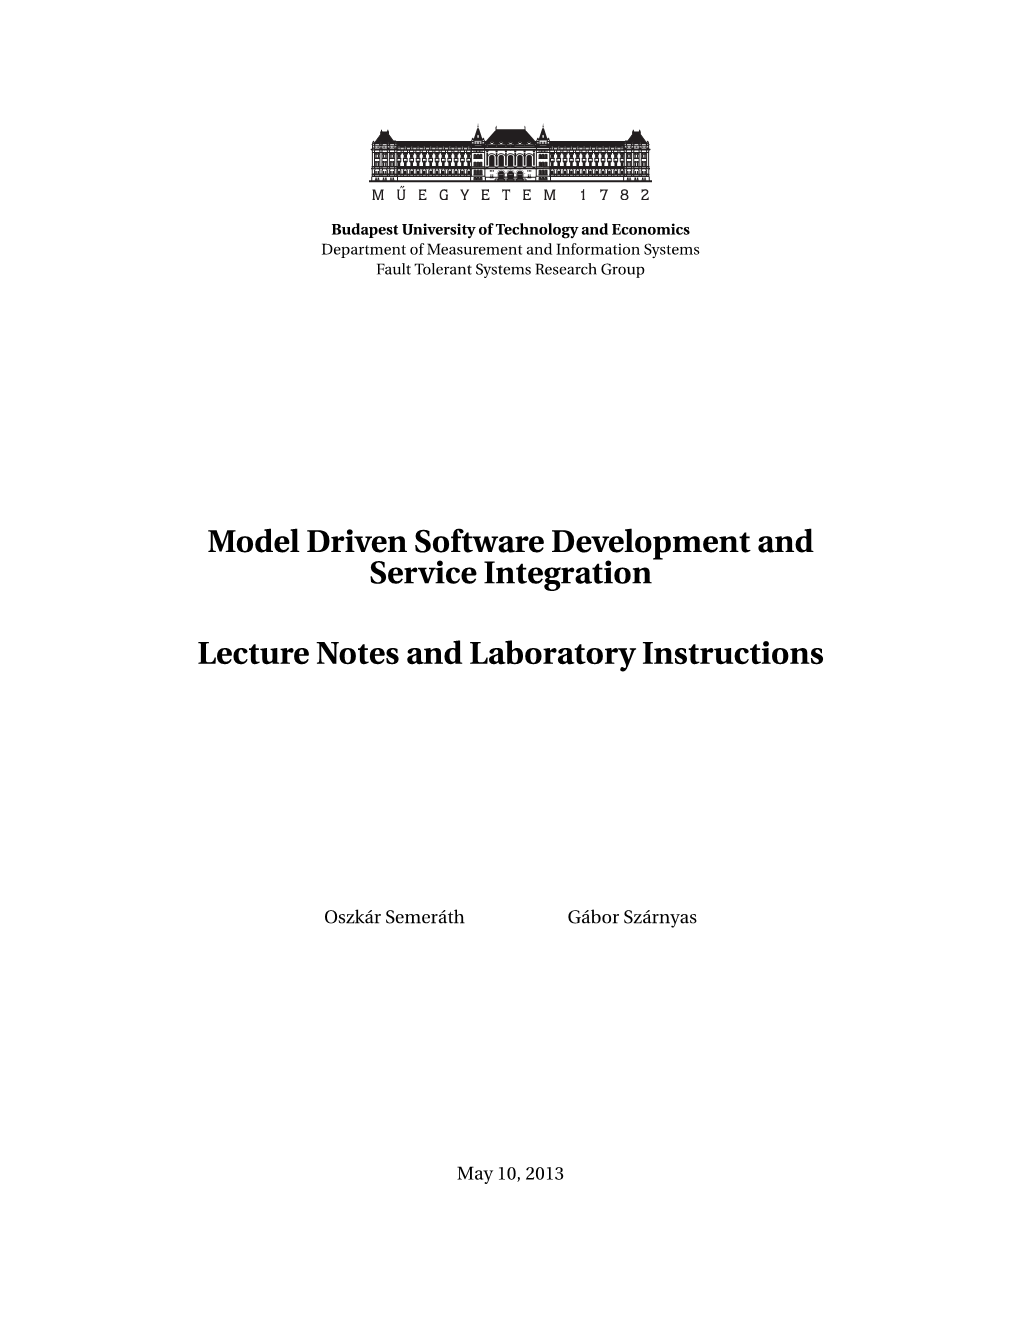 Model Driven Software Development and Service Integration Lecture